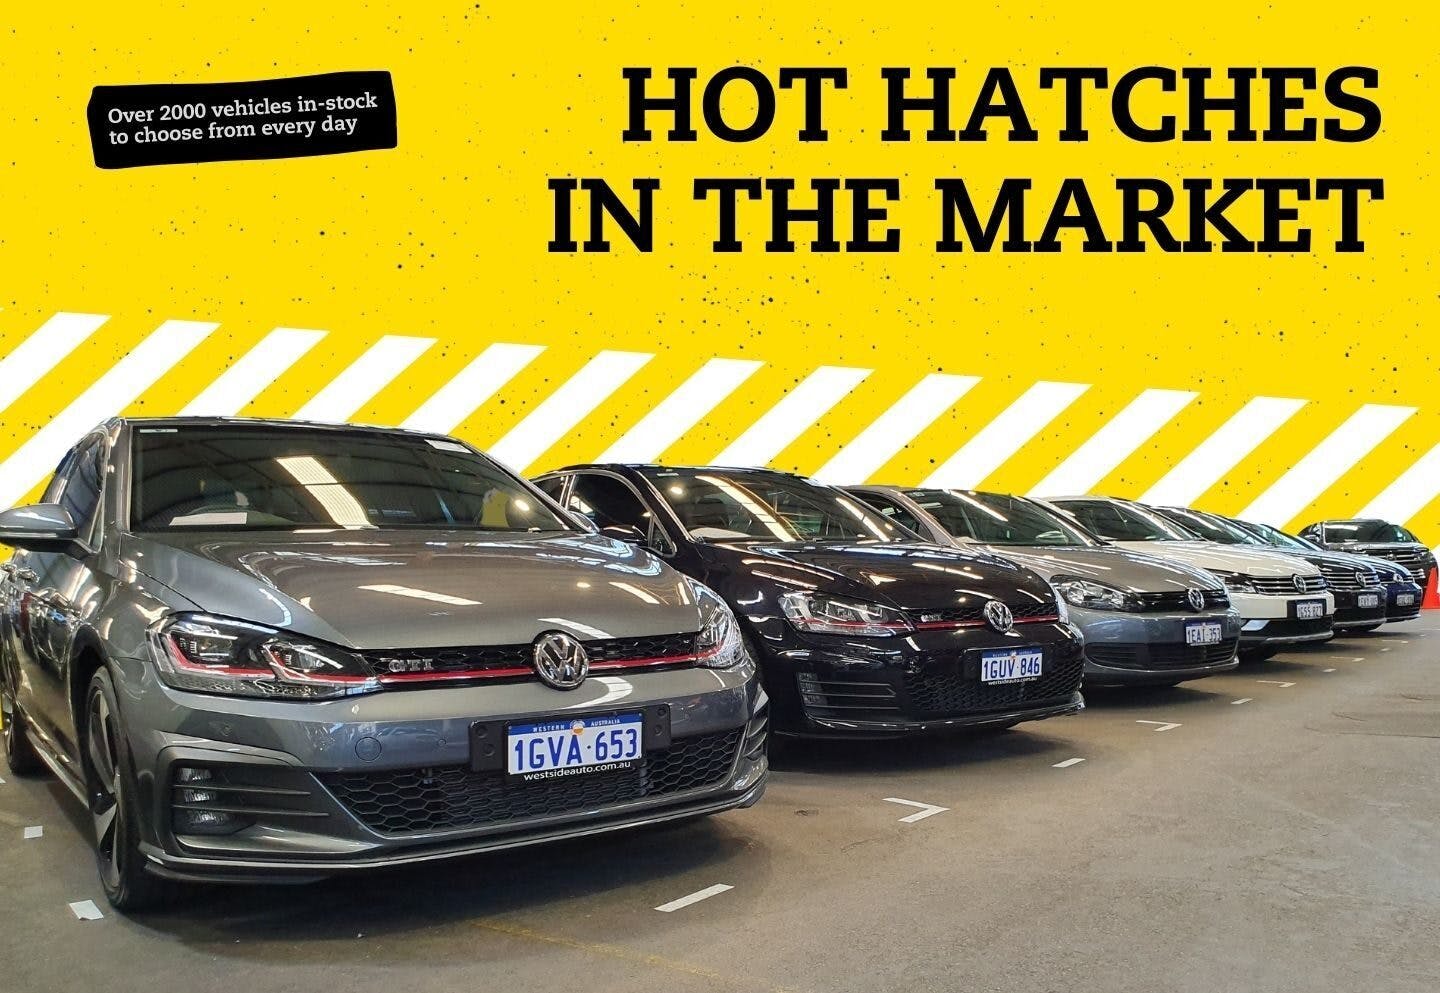 Hot Hatches in the Market